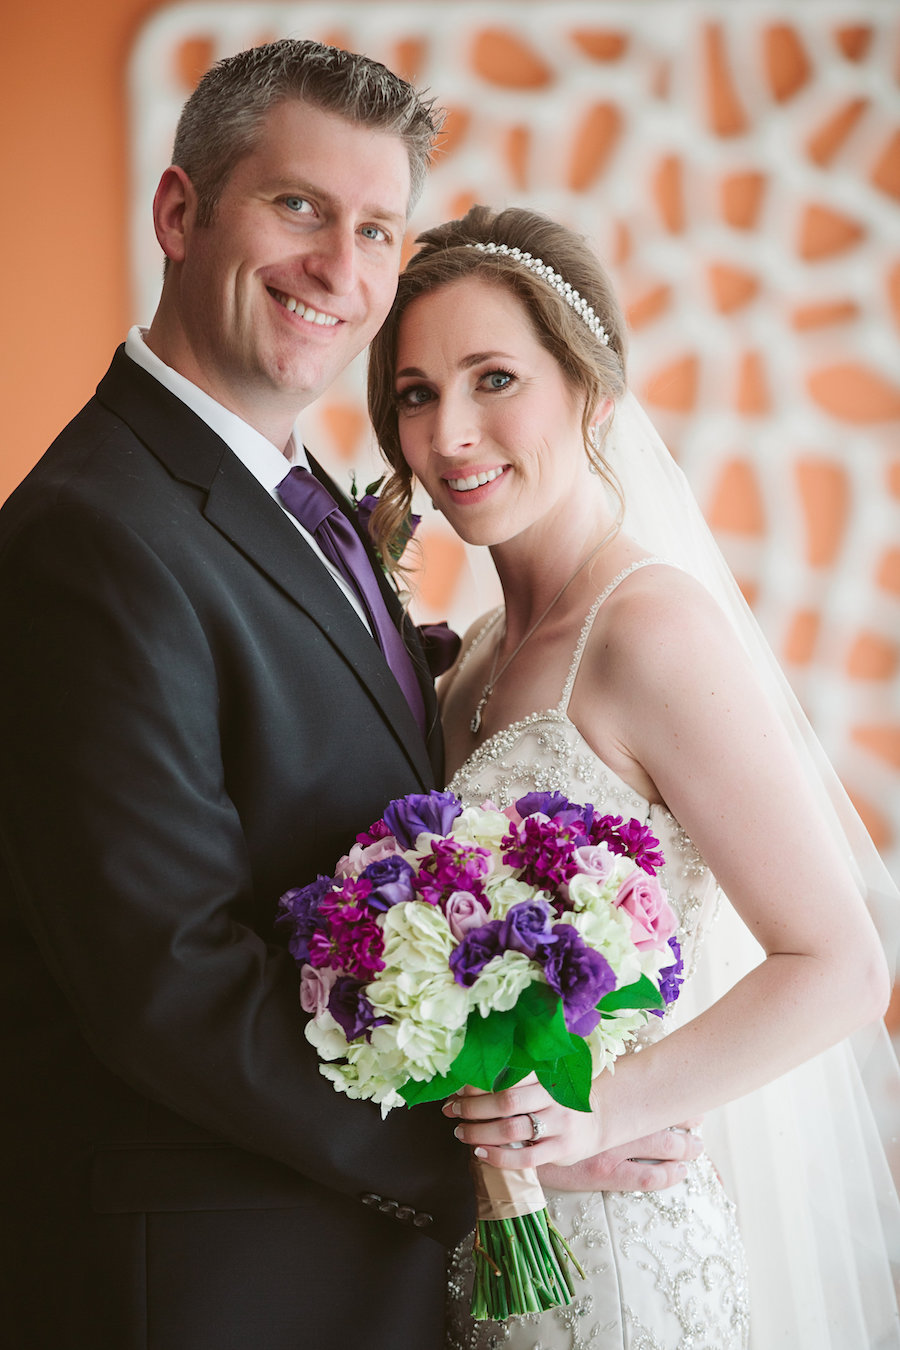 Bride and Groom Wedding Portraits with Purple and White Wedding Bouquet | Clearwater Beach Wedding Florist Iza's Flowers | Wedding Venue Hilton Clearwater Beach